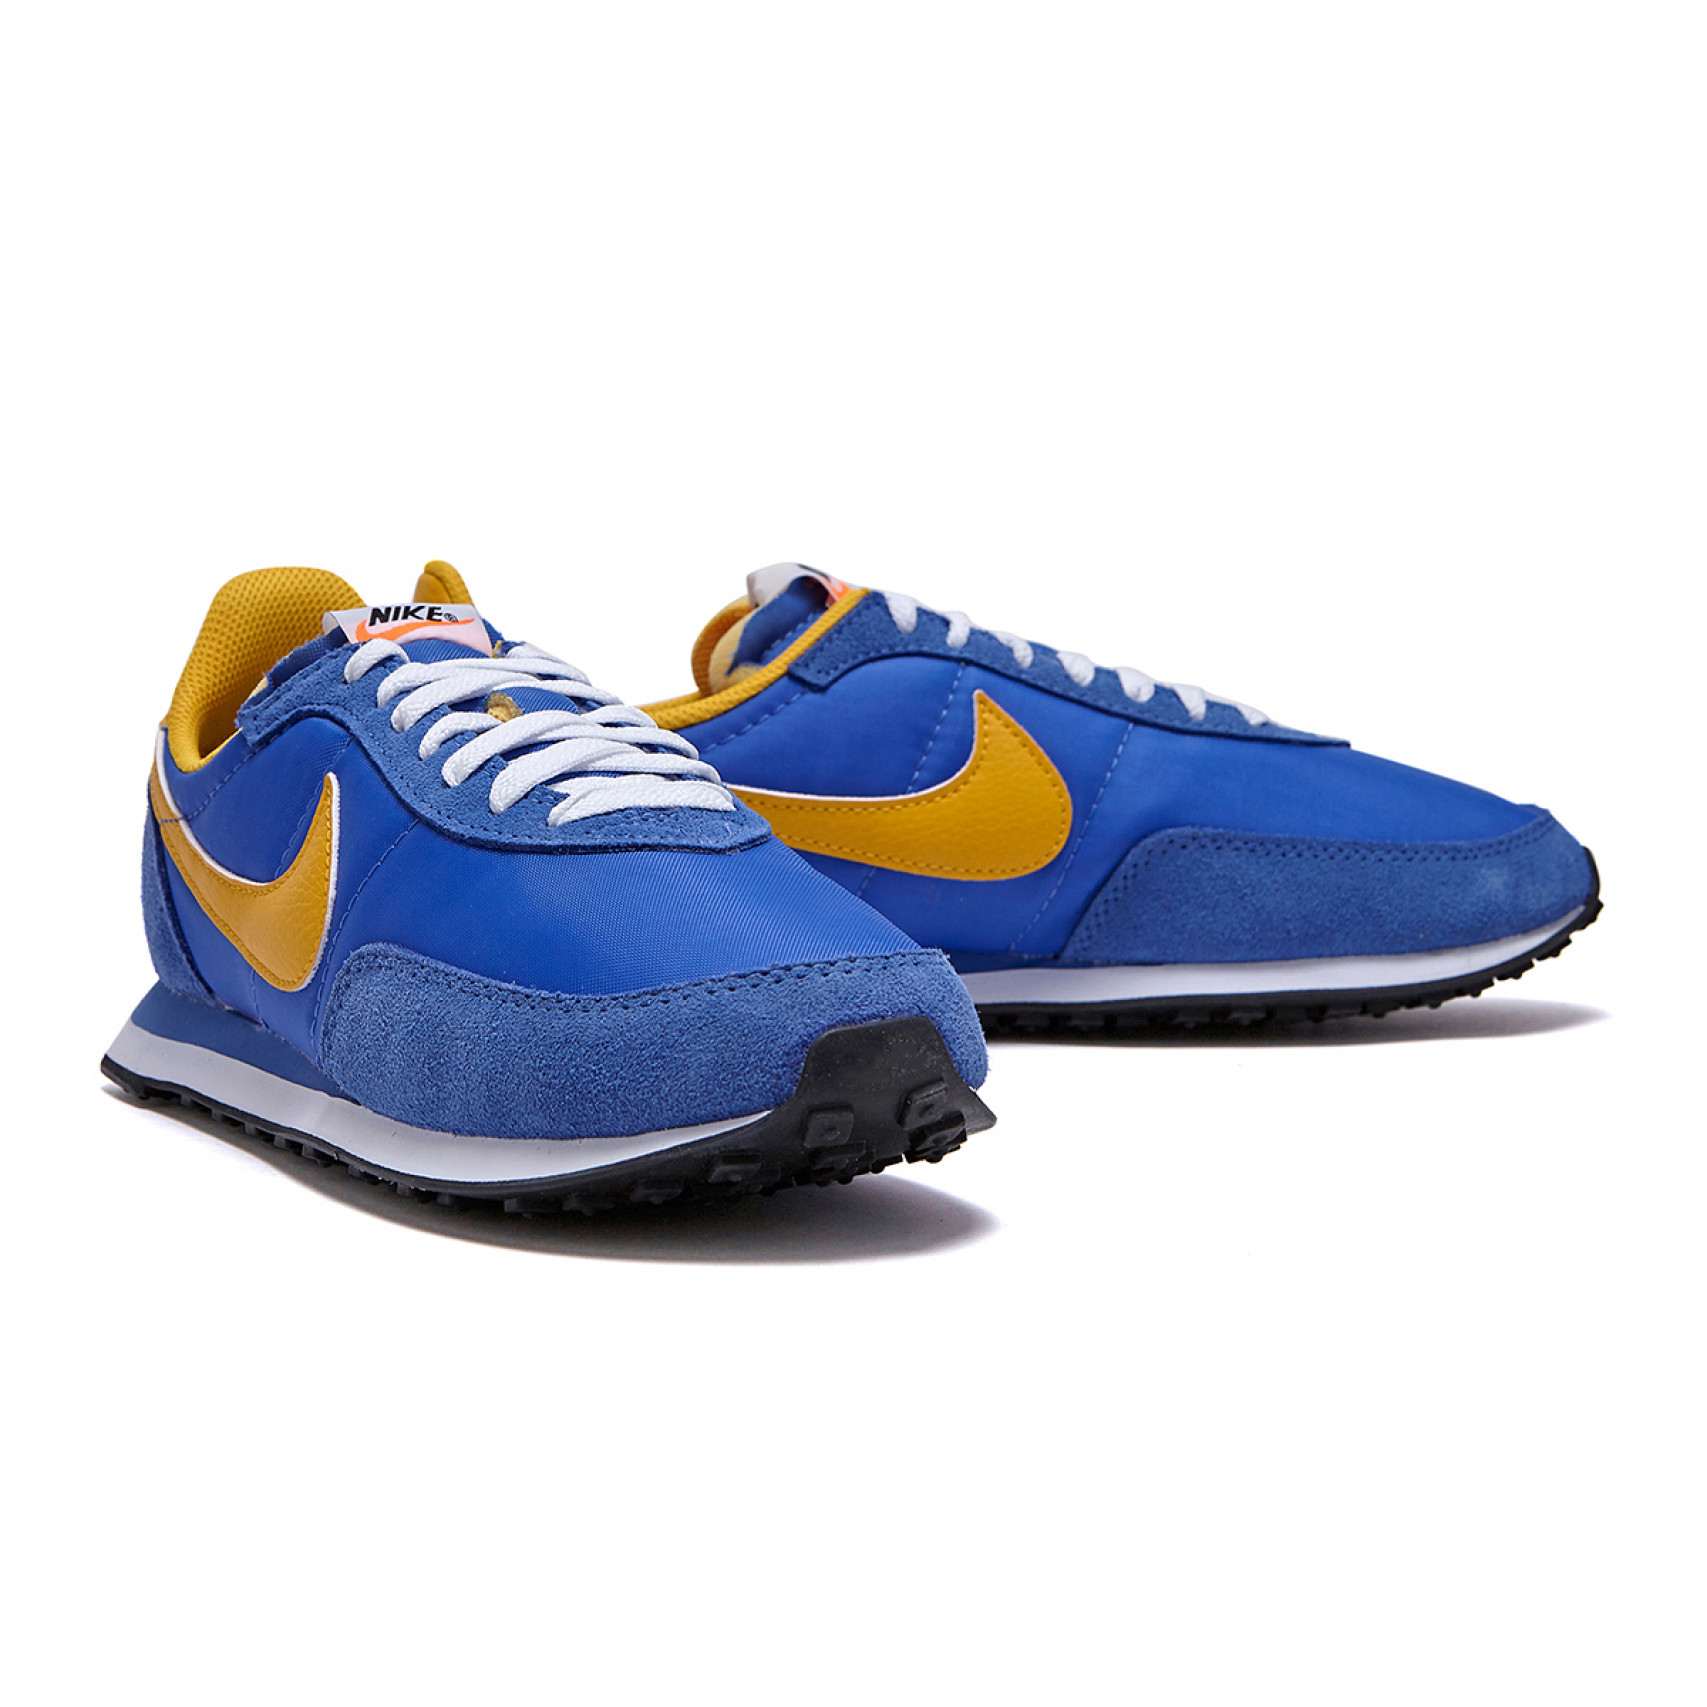 NIKE WAFFLE TRAINER 2 / DH1349-402